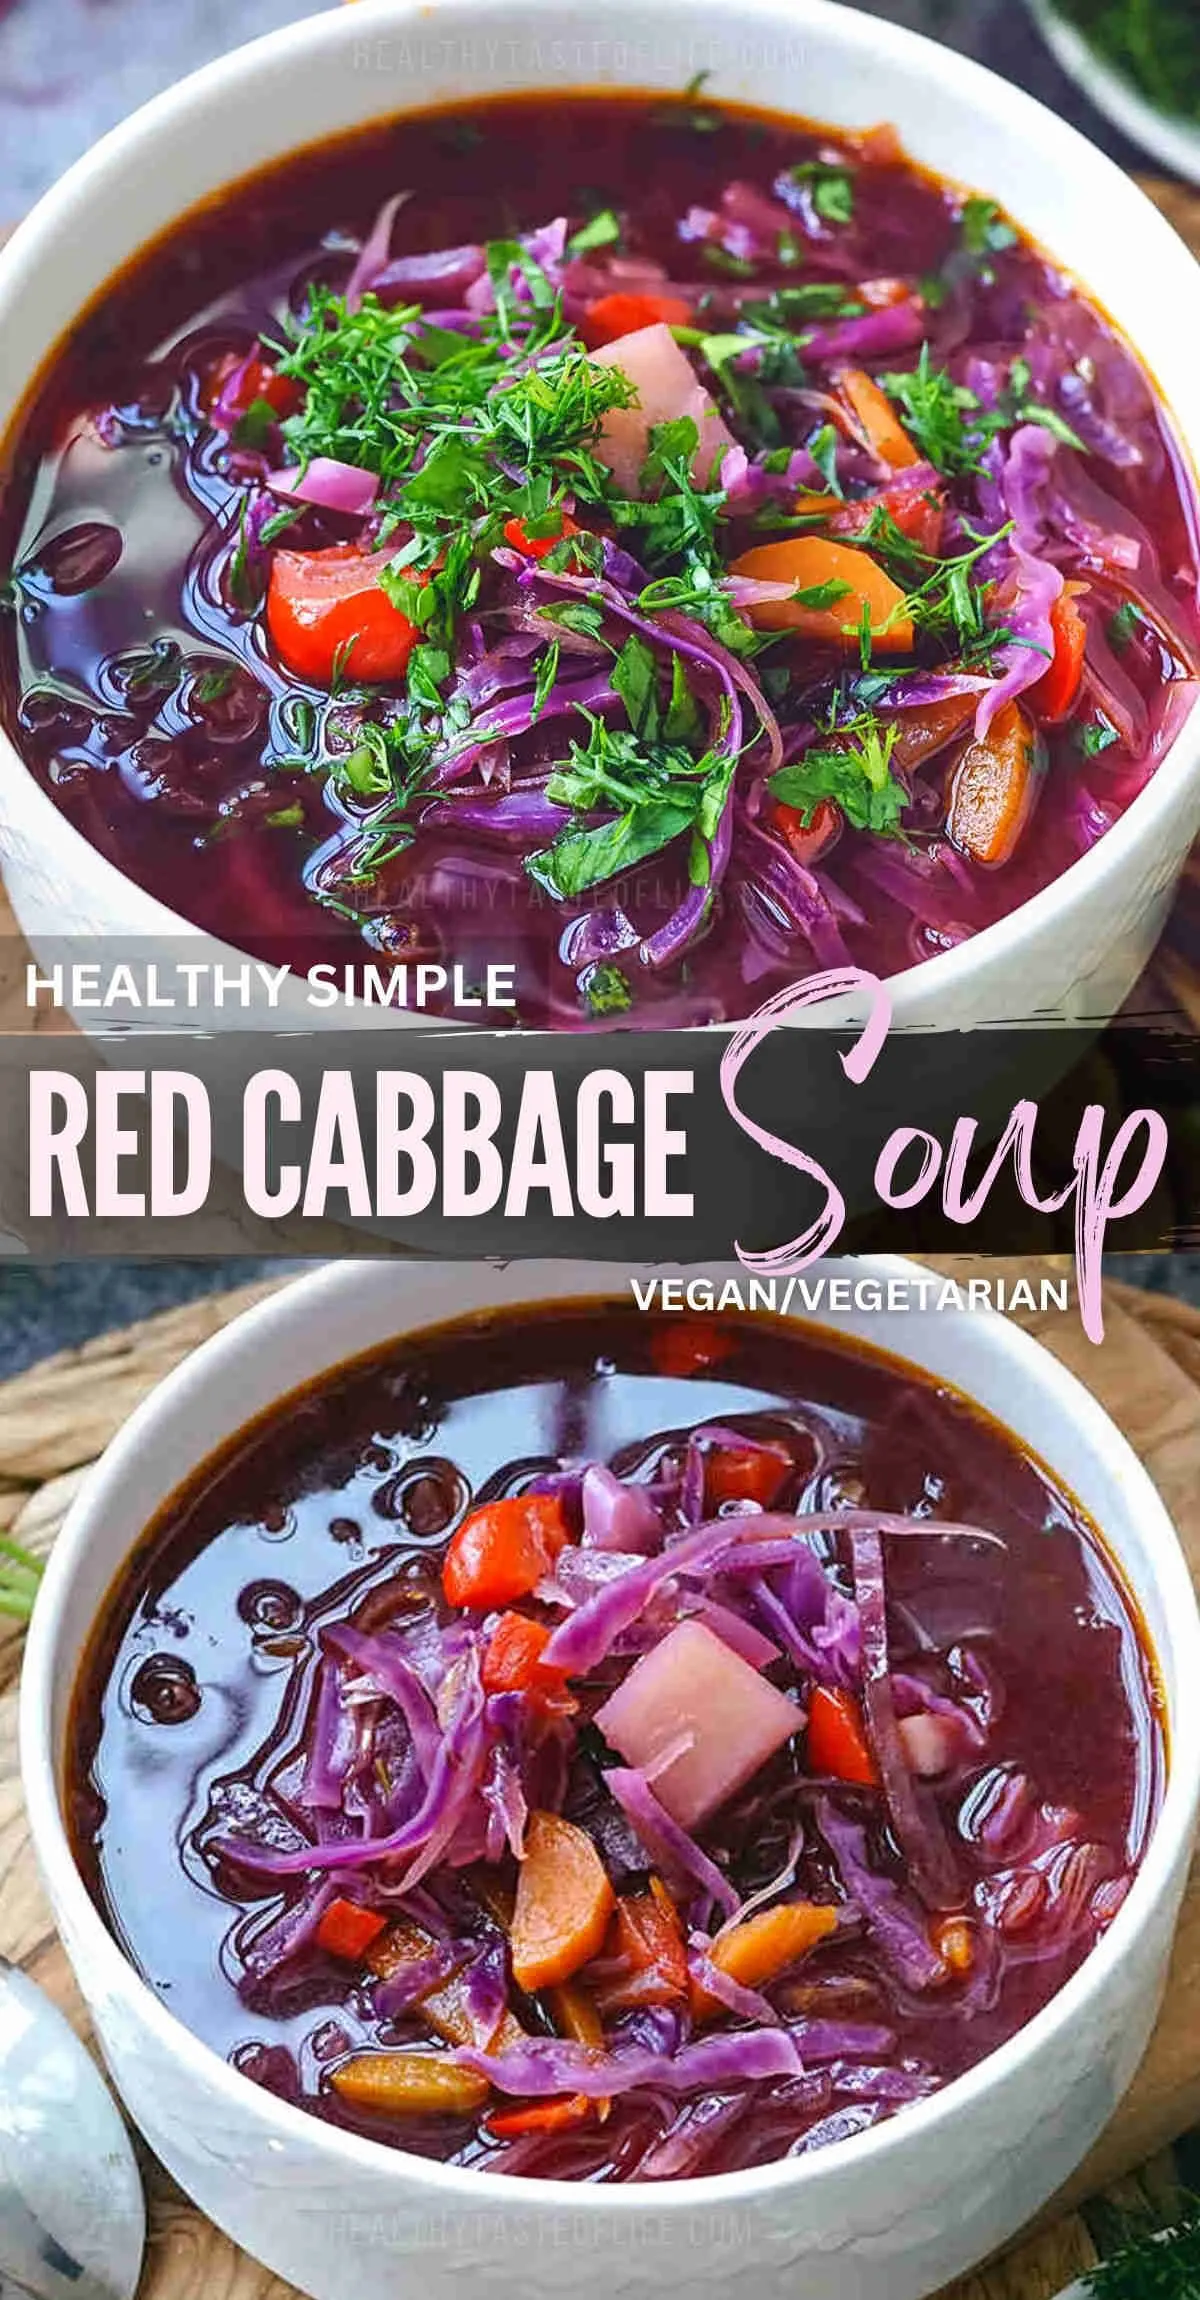 This healthy red cabbage soup recipe offers a sweet and sour taste, perfect for those looking for a vegan or vegetarian option. It’s packed with nutrients and texture from sweet veggies and red cabbage sauerkraut. This red cabbage soup is easy, simple, cheap and delicious - perfect for cold days. #redcabbage #soup #cabbagesoup #healthysoup #vegansoup #sauerkraut #veggie